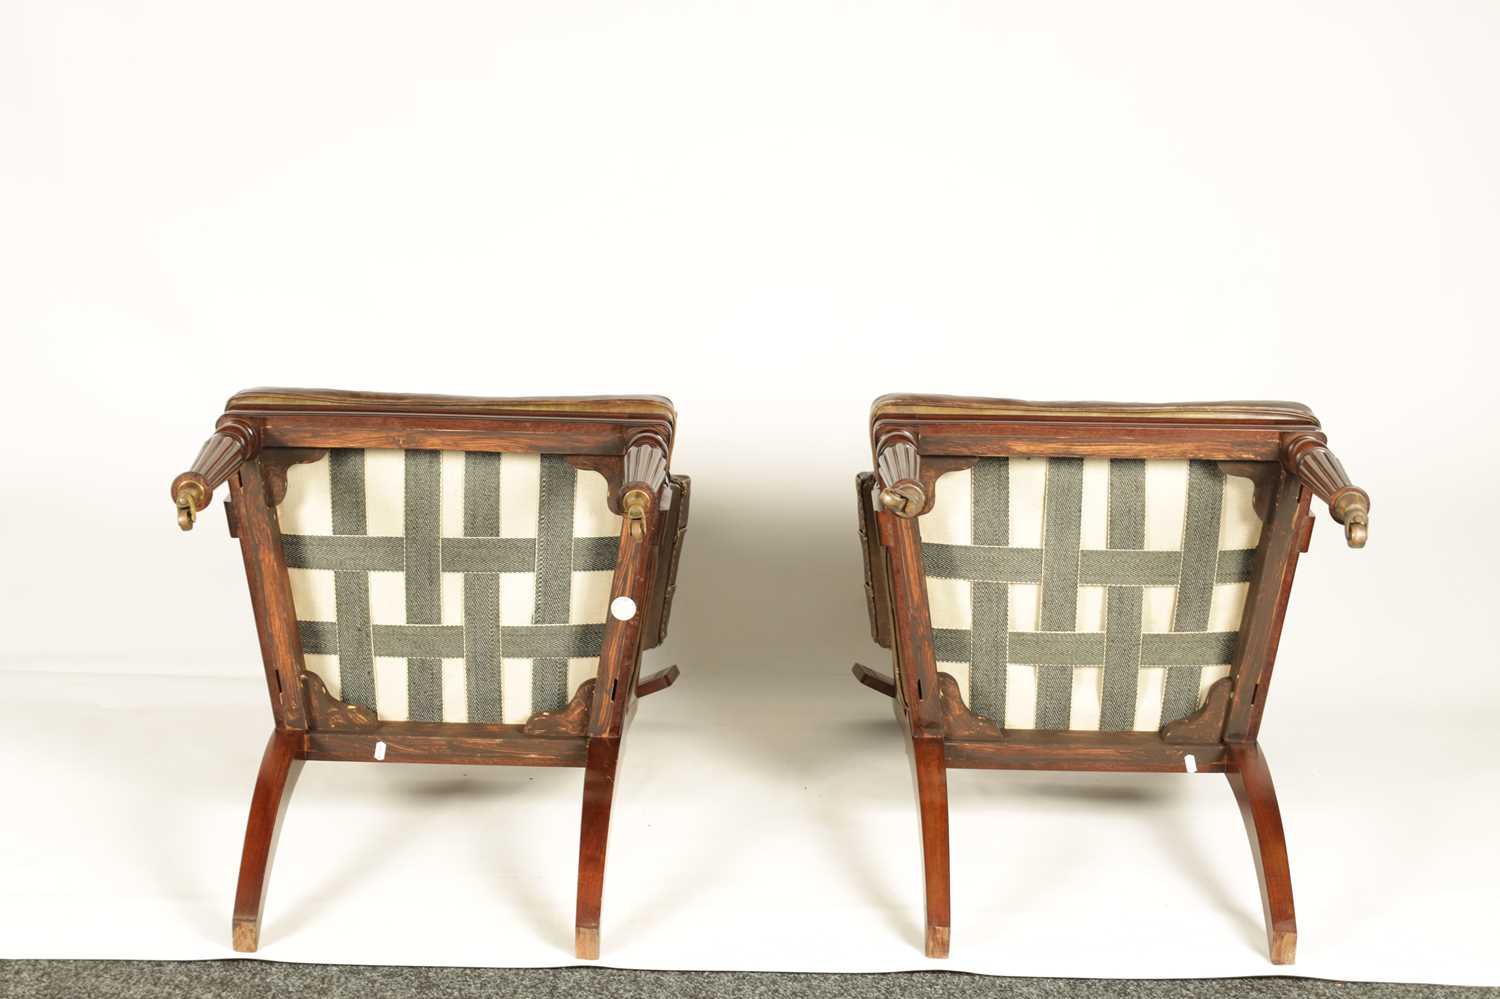 A GOOD PAIR OF REGENCY STYLE MAHOGANY DESK CHAIRS IN THE MANNER OF GILLOWS - Image 9 of 10